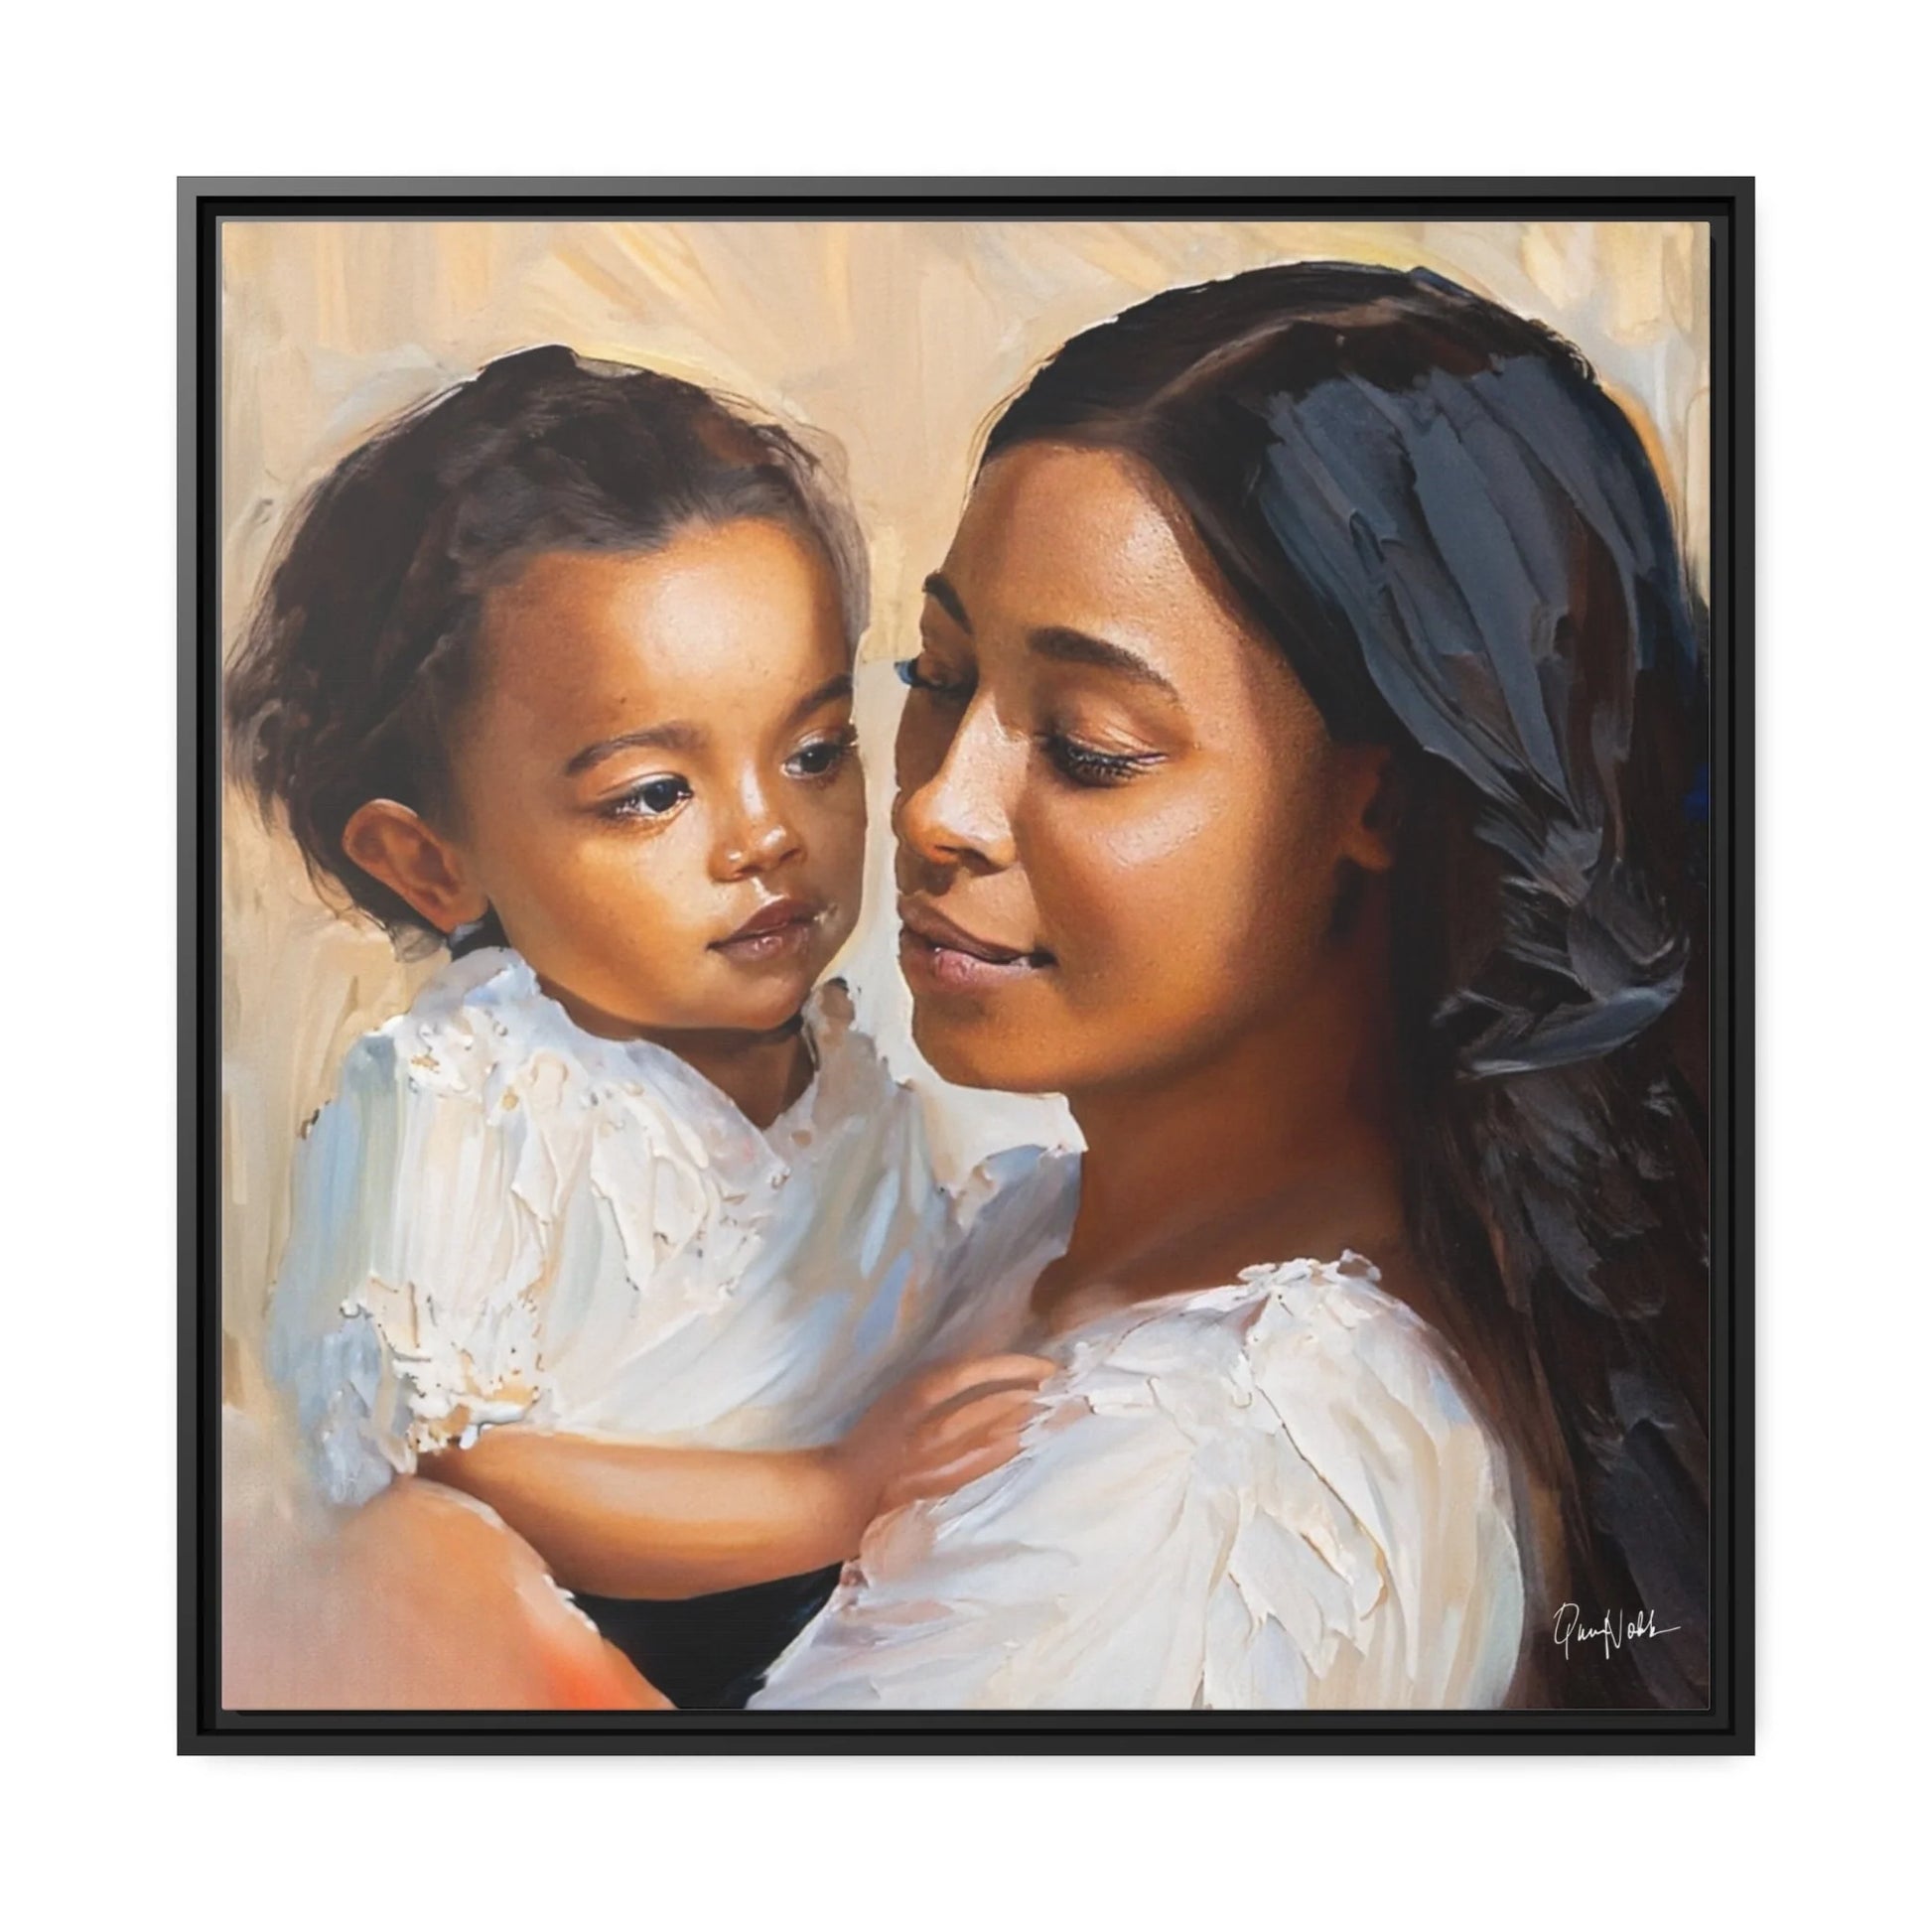 "Exquisite Mother and Child Portrait Canvas Wall Art with Elegant Frame - Queennoble"